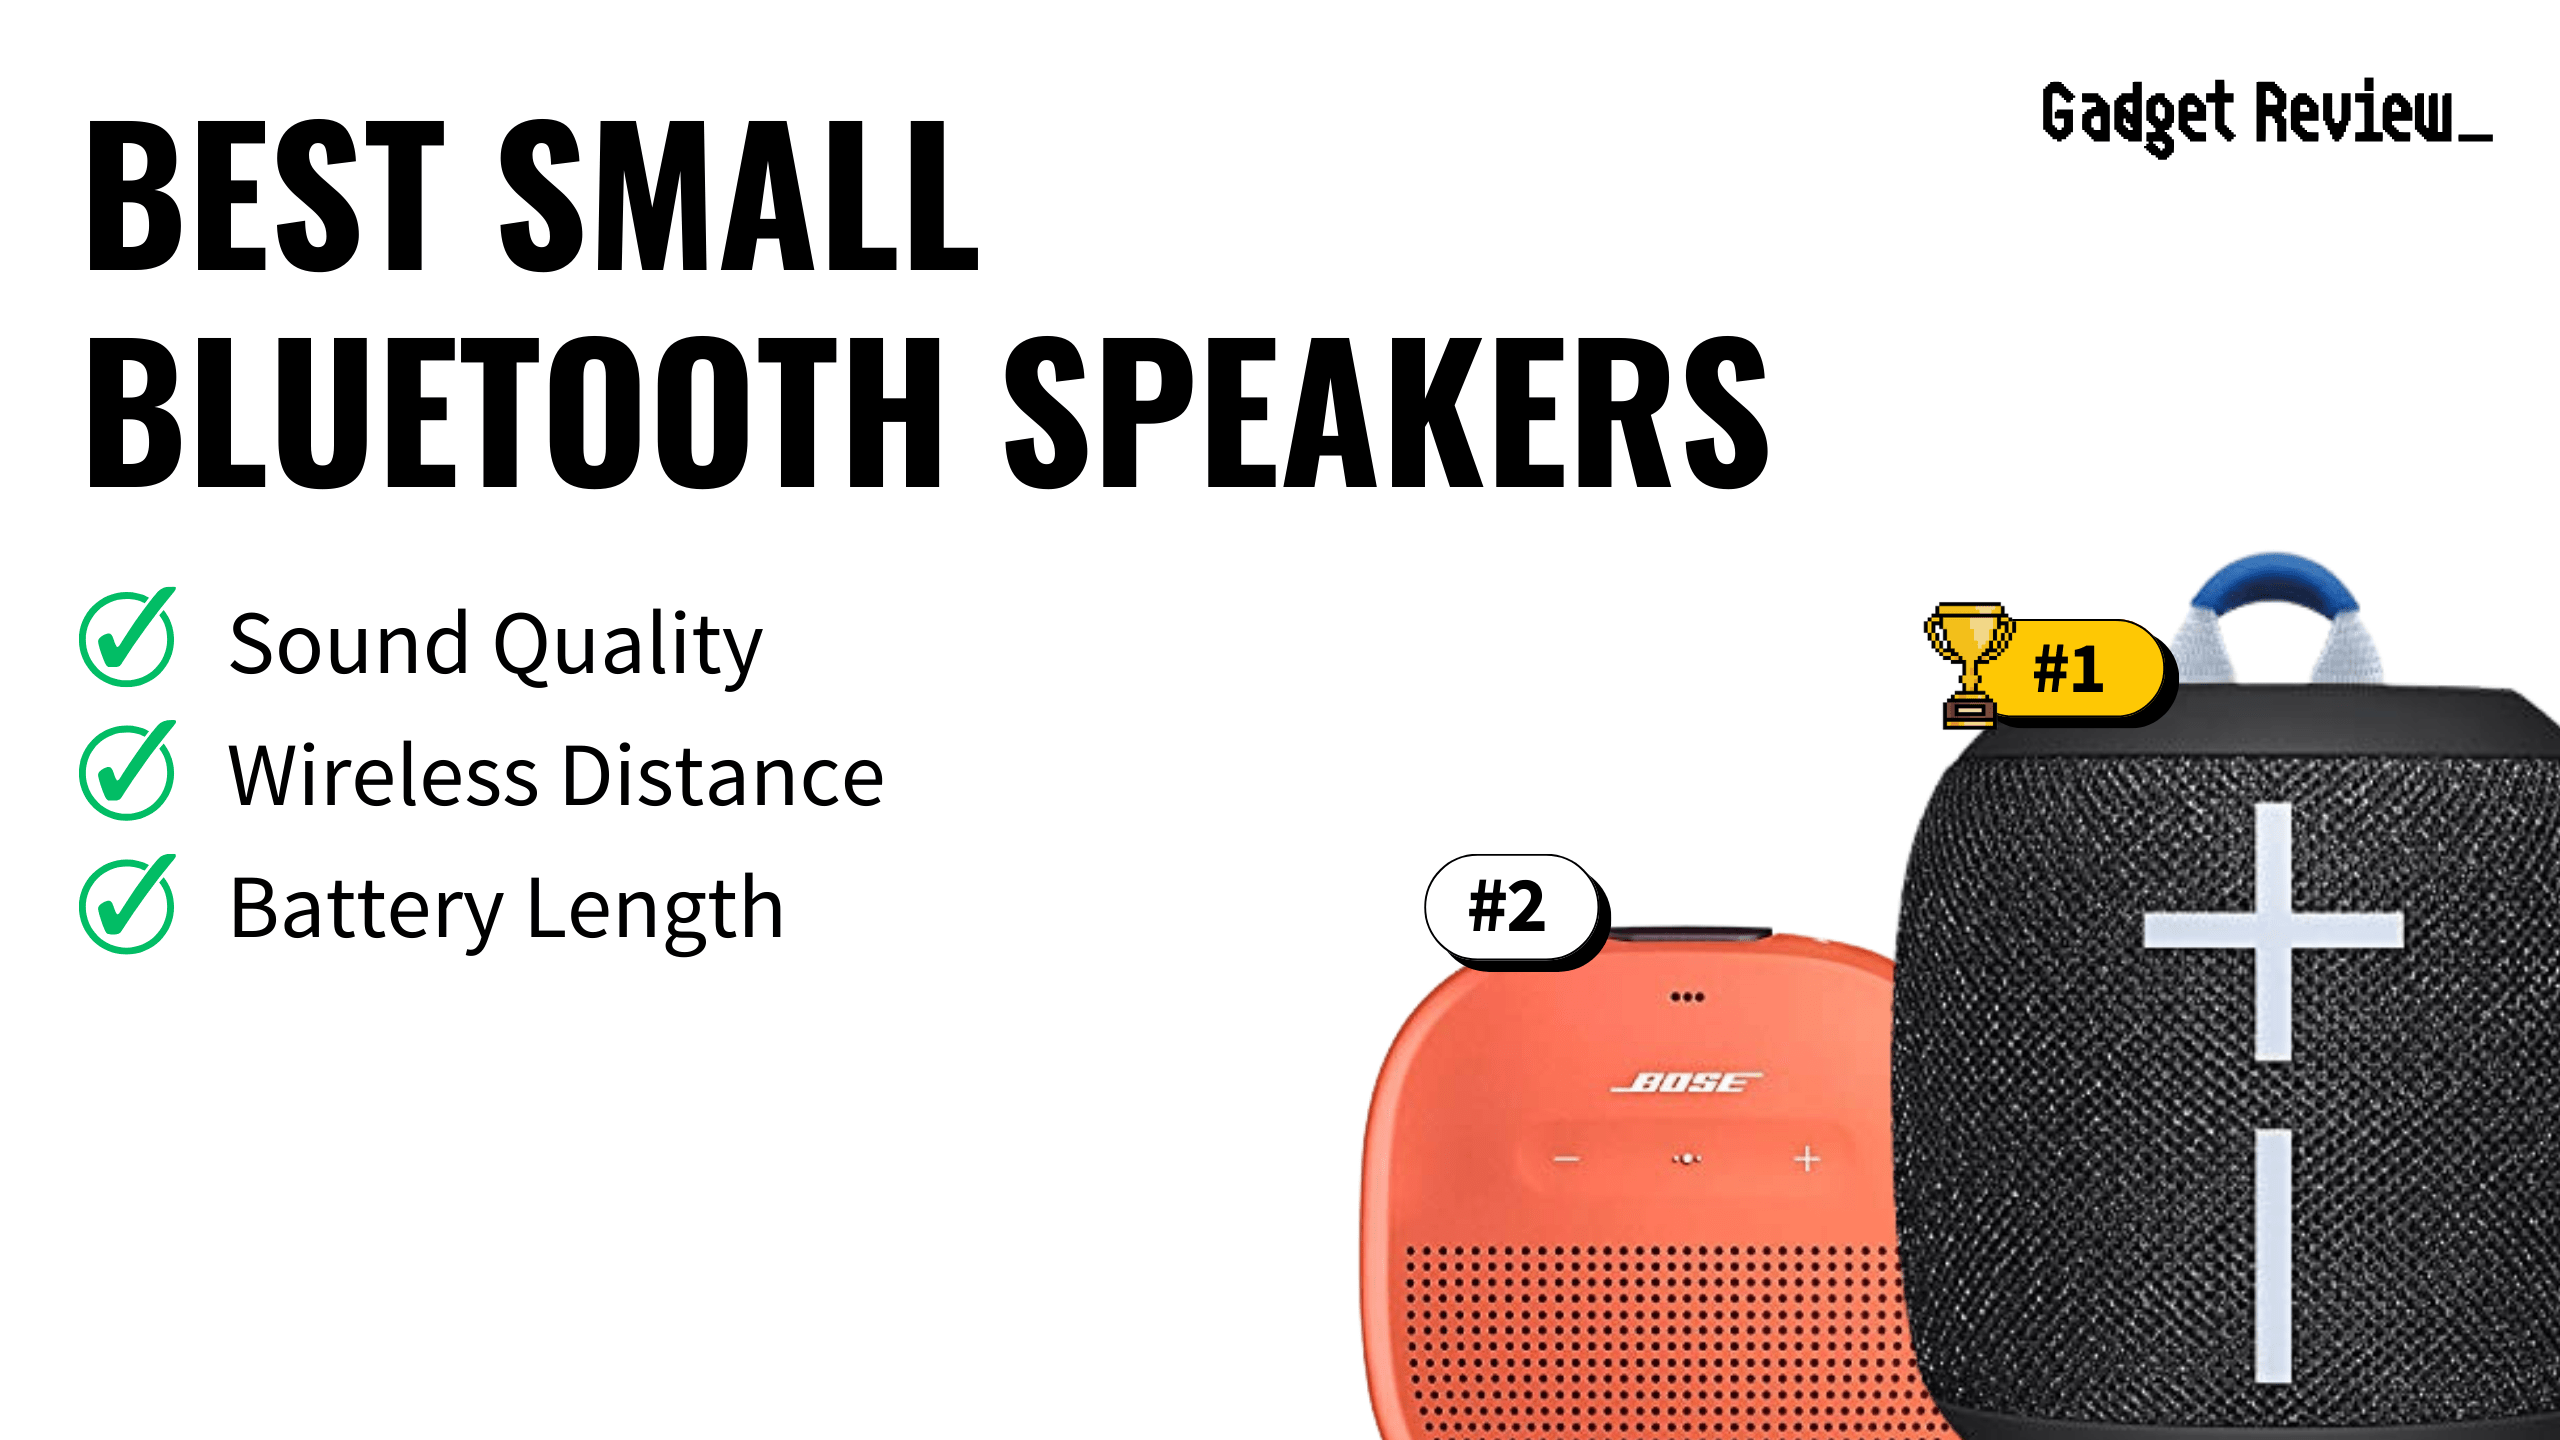 best small bluetooth speakers featured image that shows the top three best bluetooth speaker models